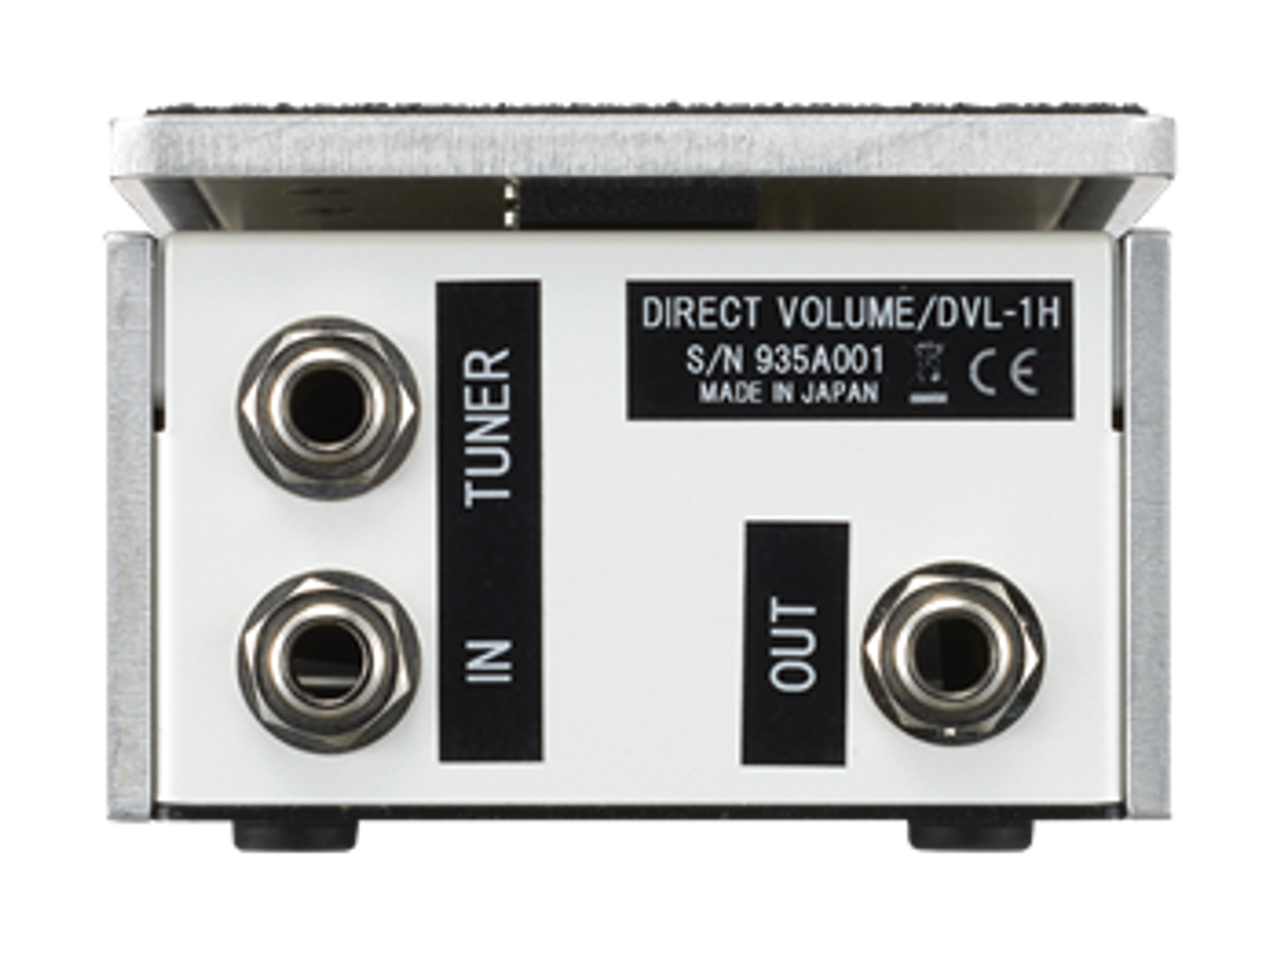 Free The Tone DVL-1L Volume Pedal with Full-Rotation Belt-Drive System